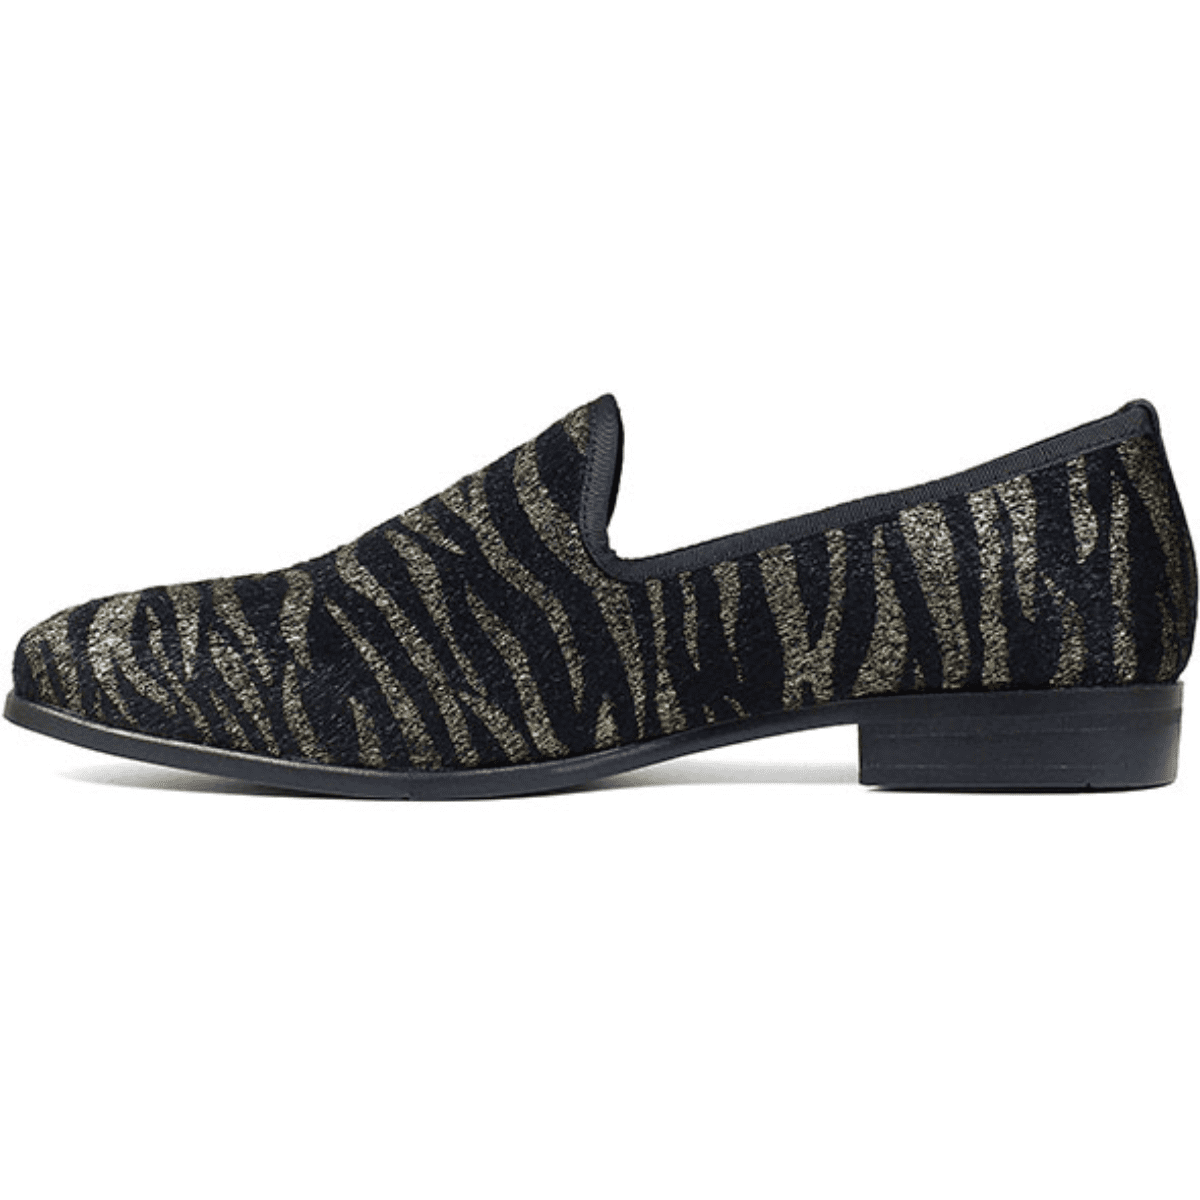 Details about   Stacy Adams Men'S Sultan Tiger Pony Hair Slip-On M Black/Gold